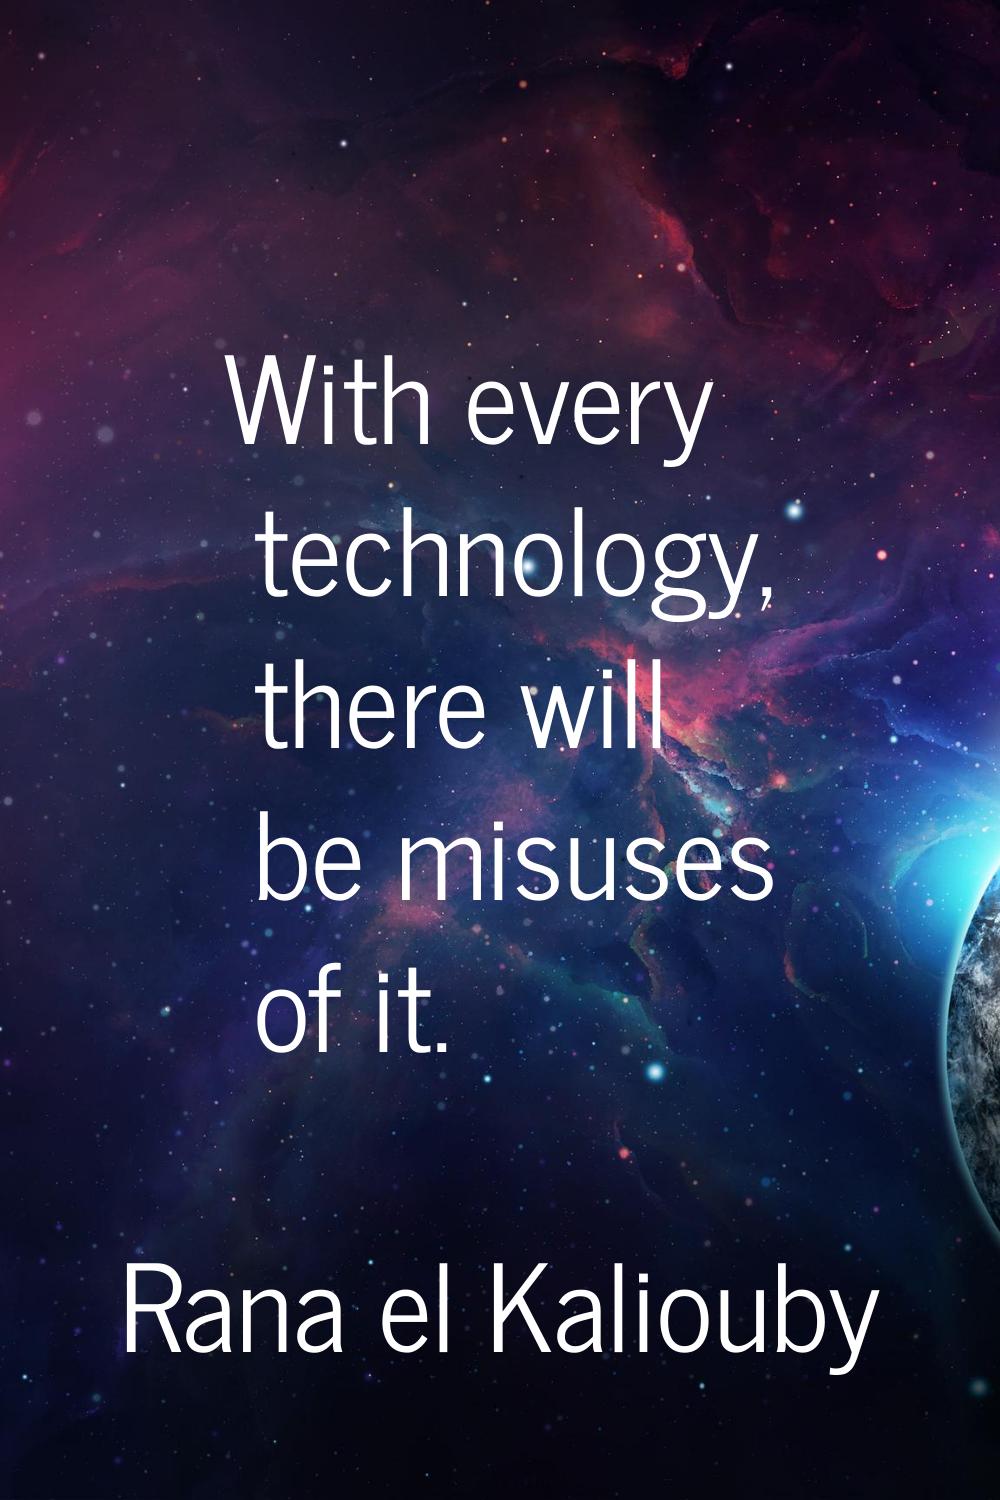 With every technology, there will be misuses of it.